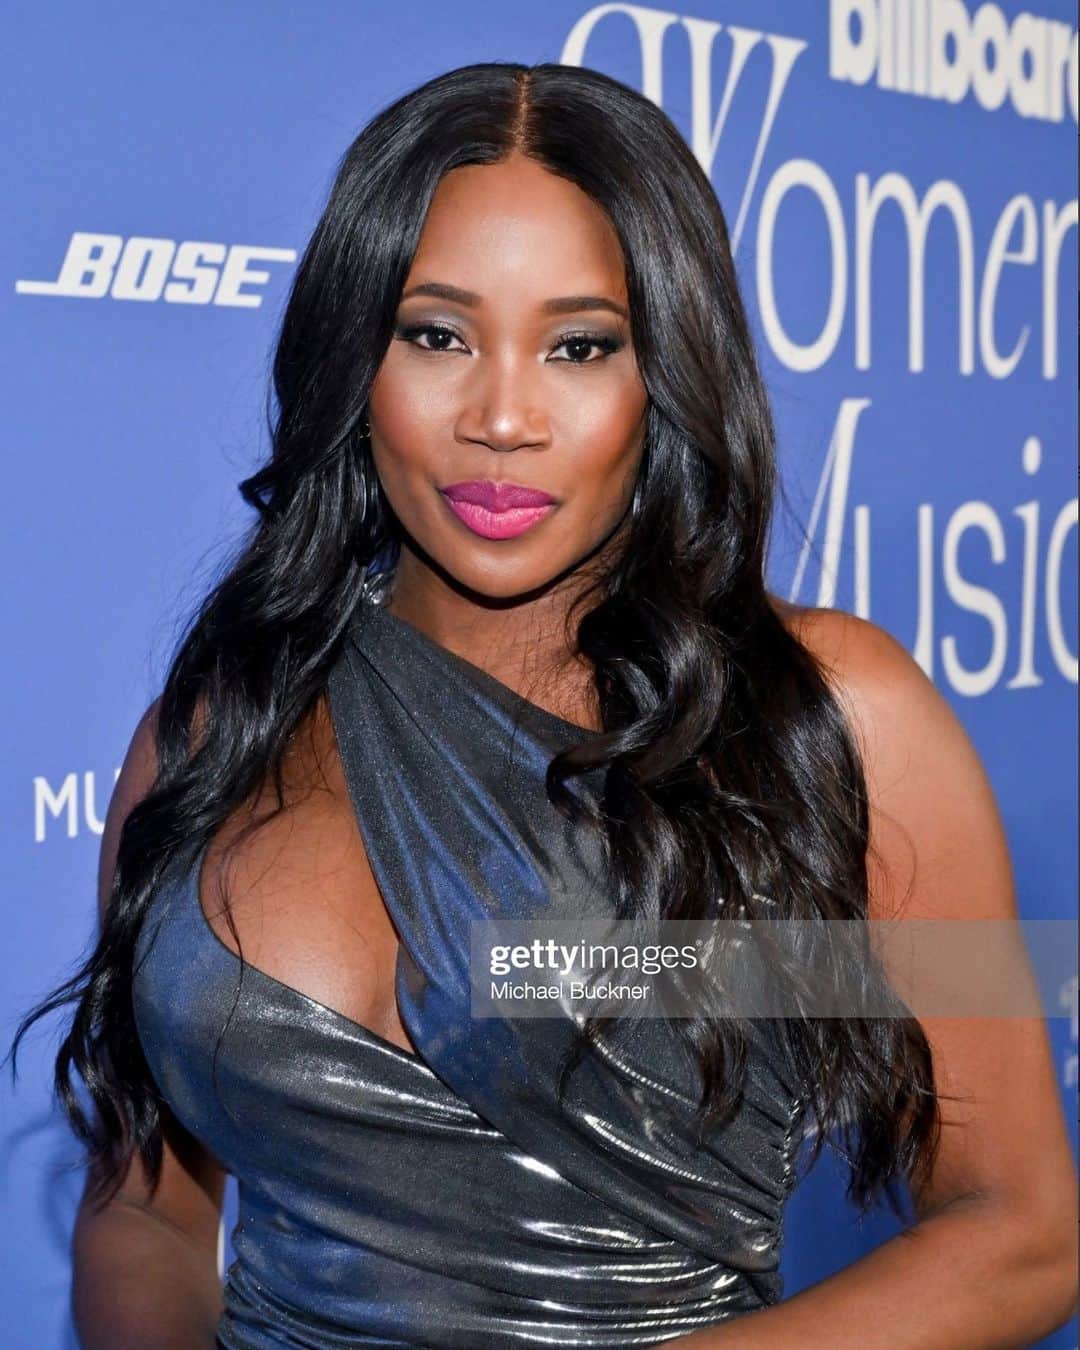 Kissのインスタグラム：「It was such an honor to be a part of Billboard’s Women in Music event again last night! As a “woman in music” lol I always love celebrating my fellow ladies who are kicking ass and taking names in the music industry cuz it ain’t easy! 👊🏾 Salute to all of the 2023 honorees!! ✨ #bbwomeninmusic 📸: @61.mm」